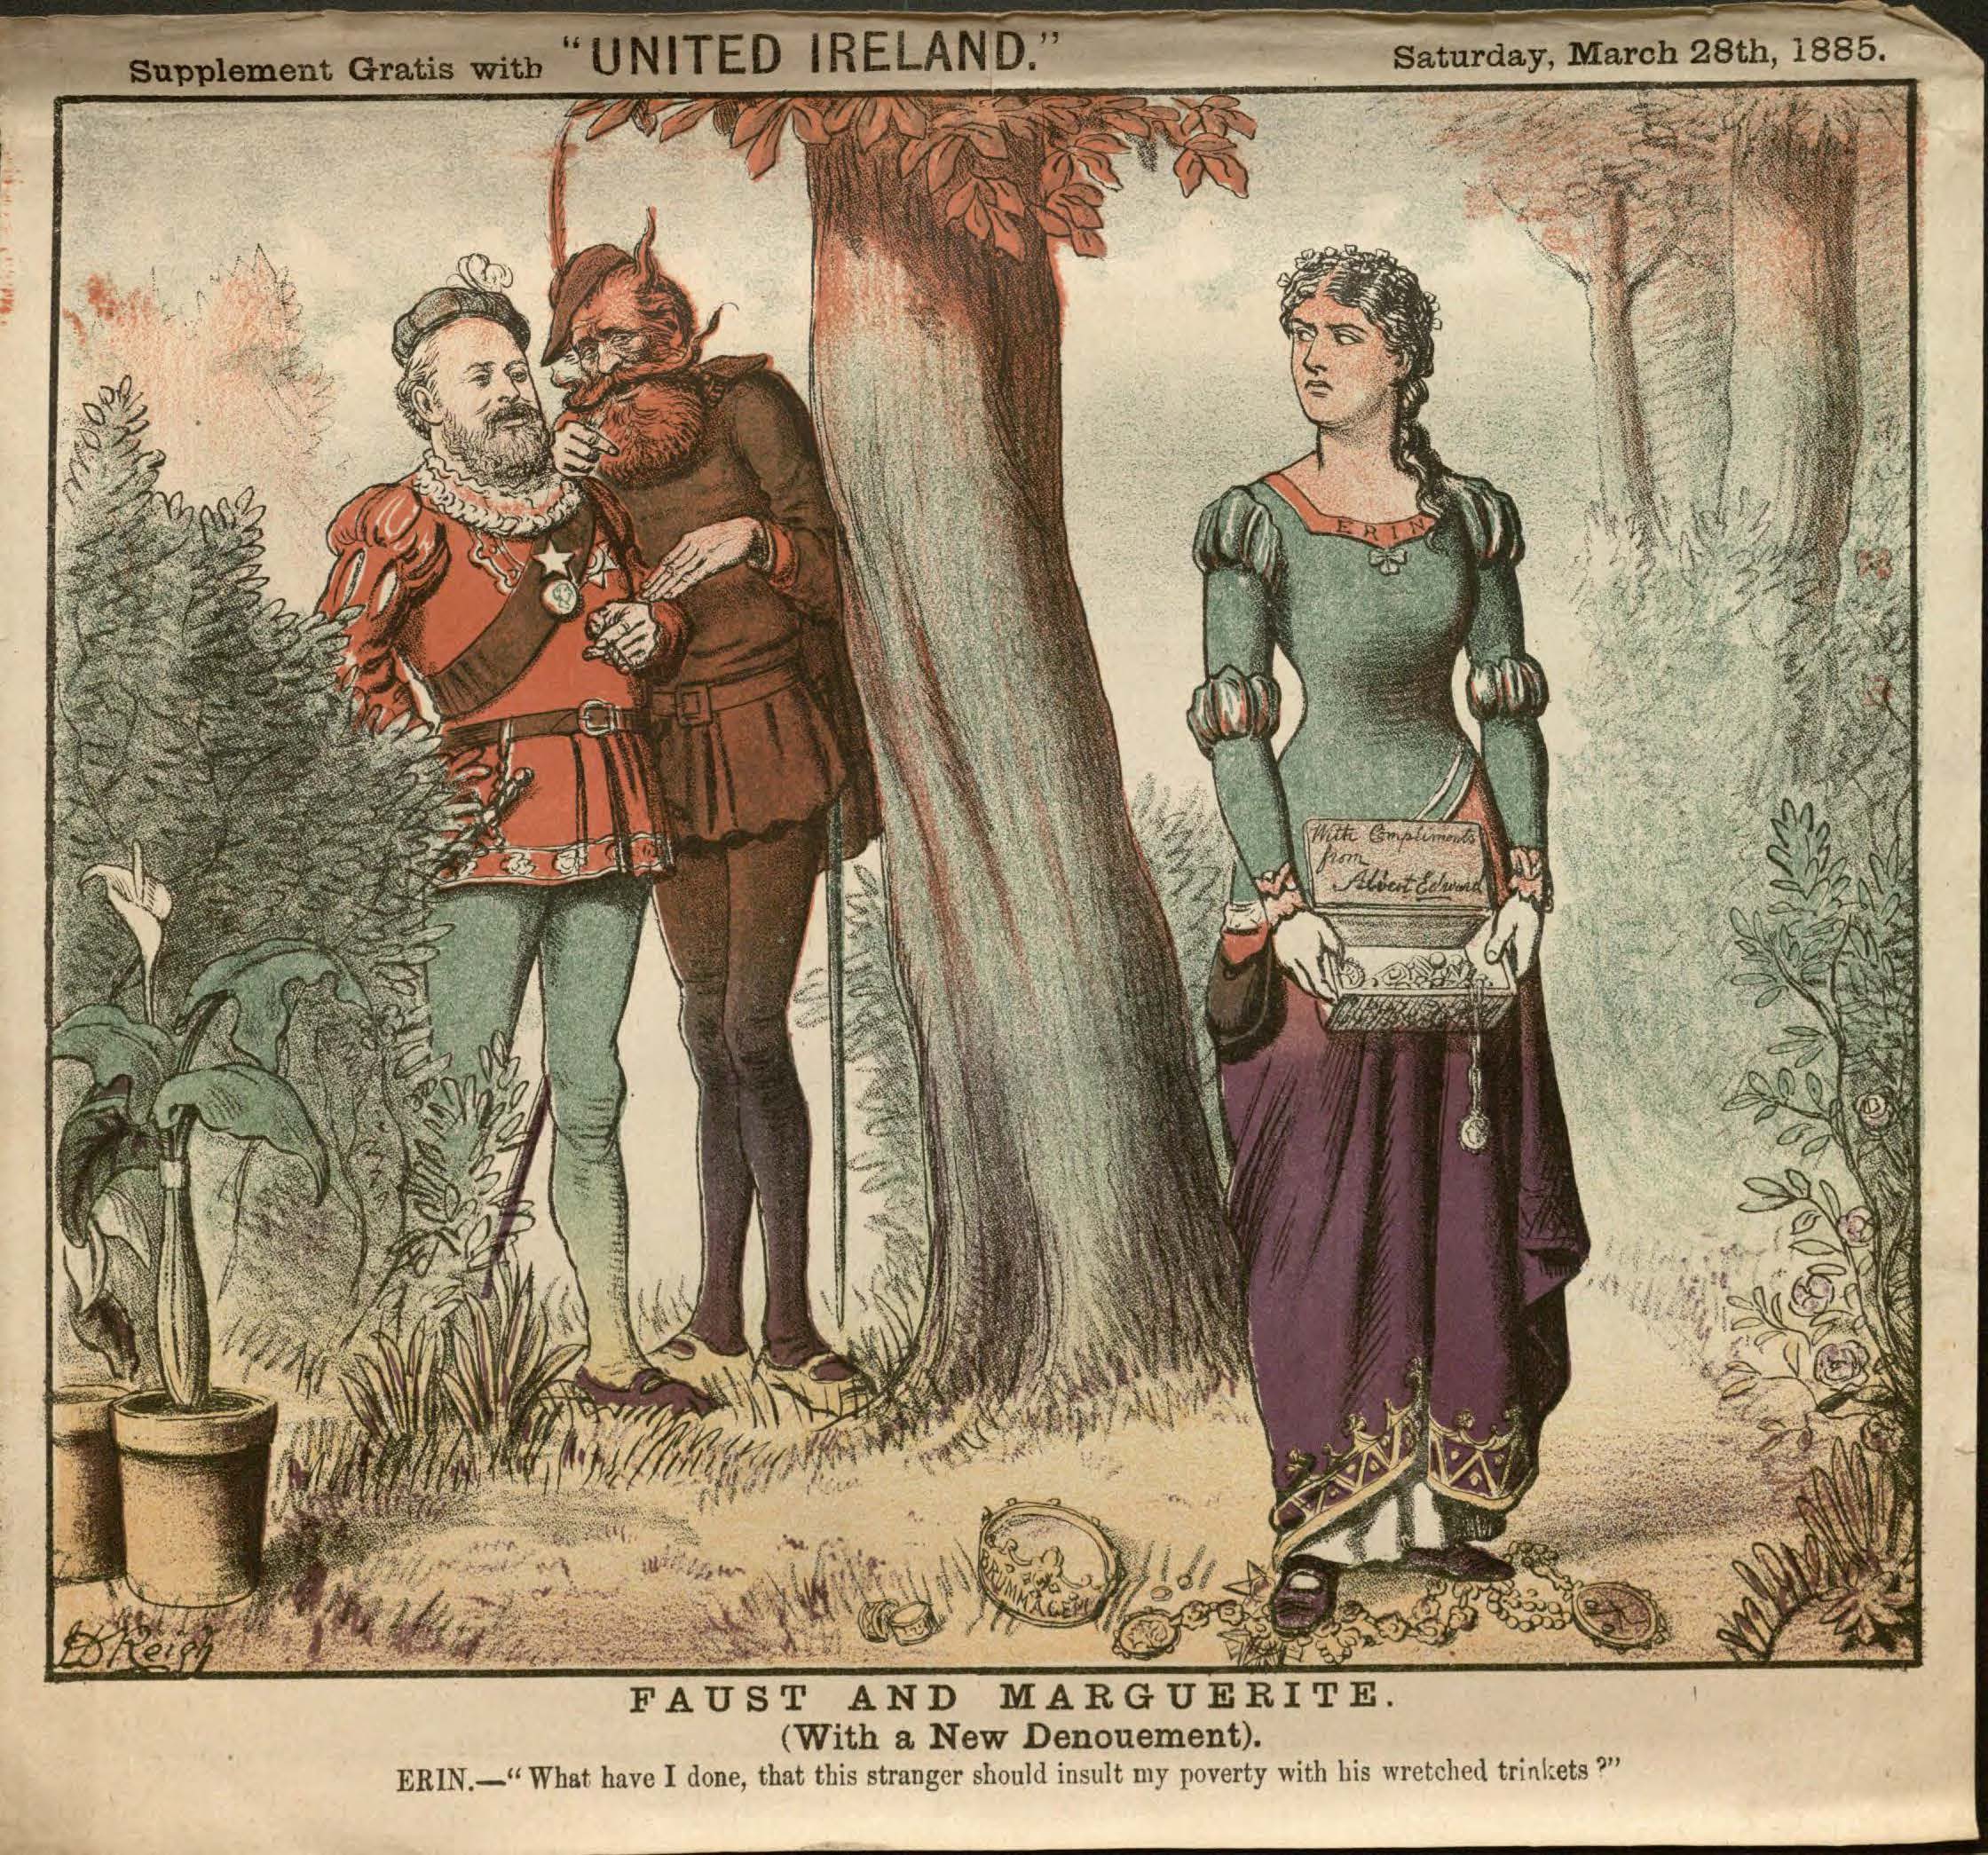 Image of Color Supplement from United Ireland, Cartoon featuring "Erin" and Earl Spencer, March 28, 1885